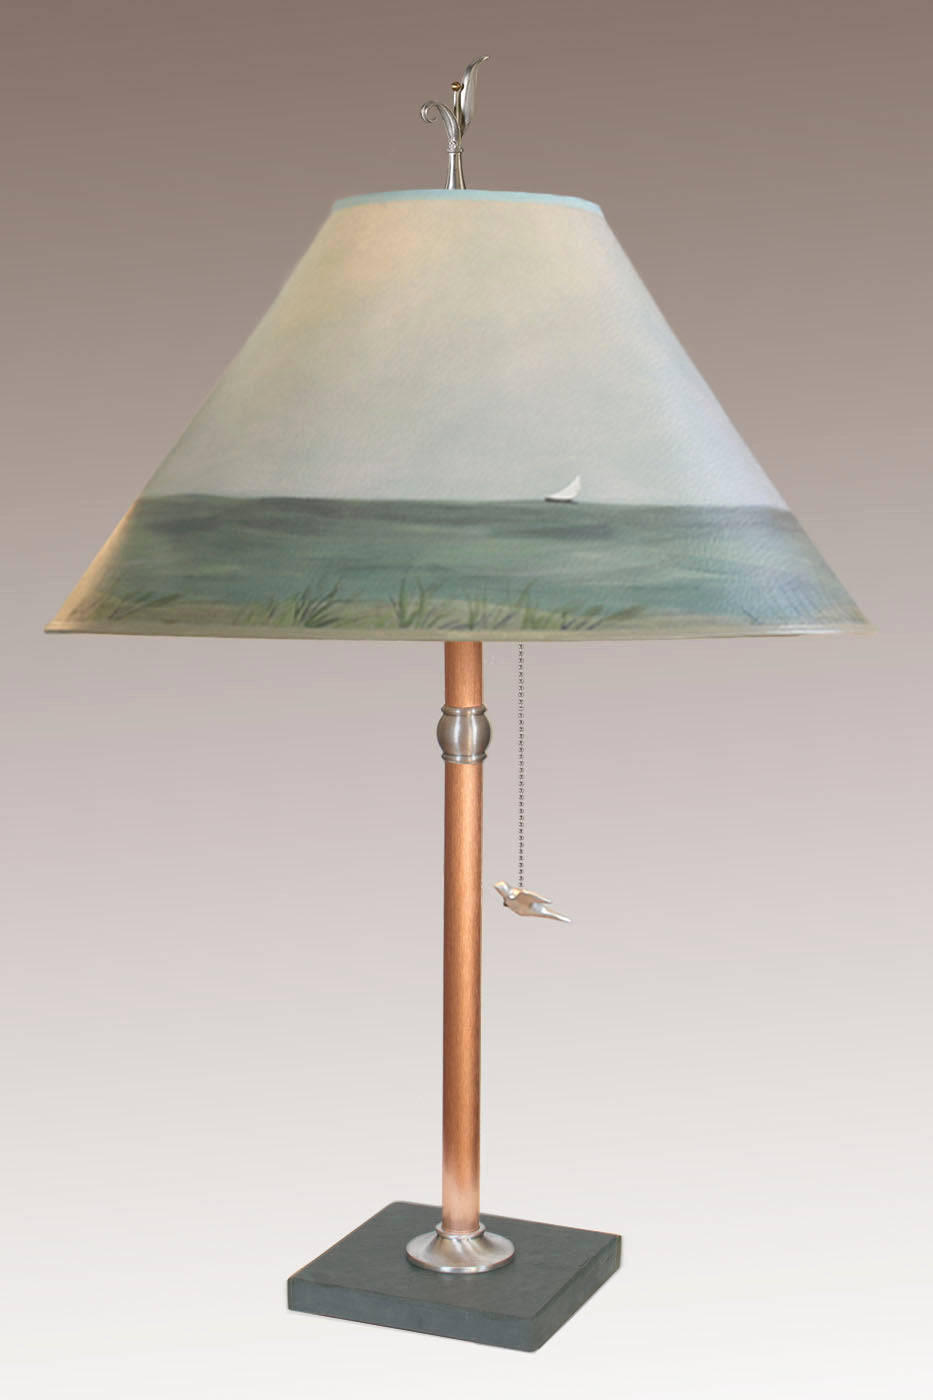 Janna Ugone & Co Table Lamps Copper Table Lamp with Large Conical Shade in Shore